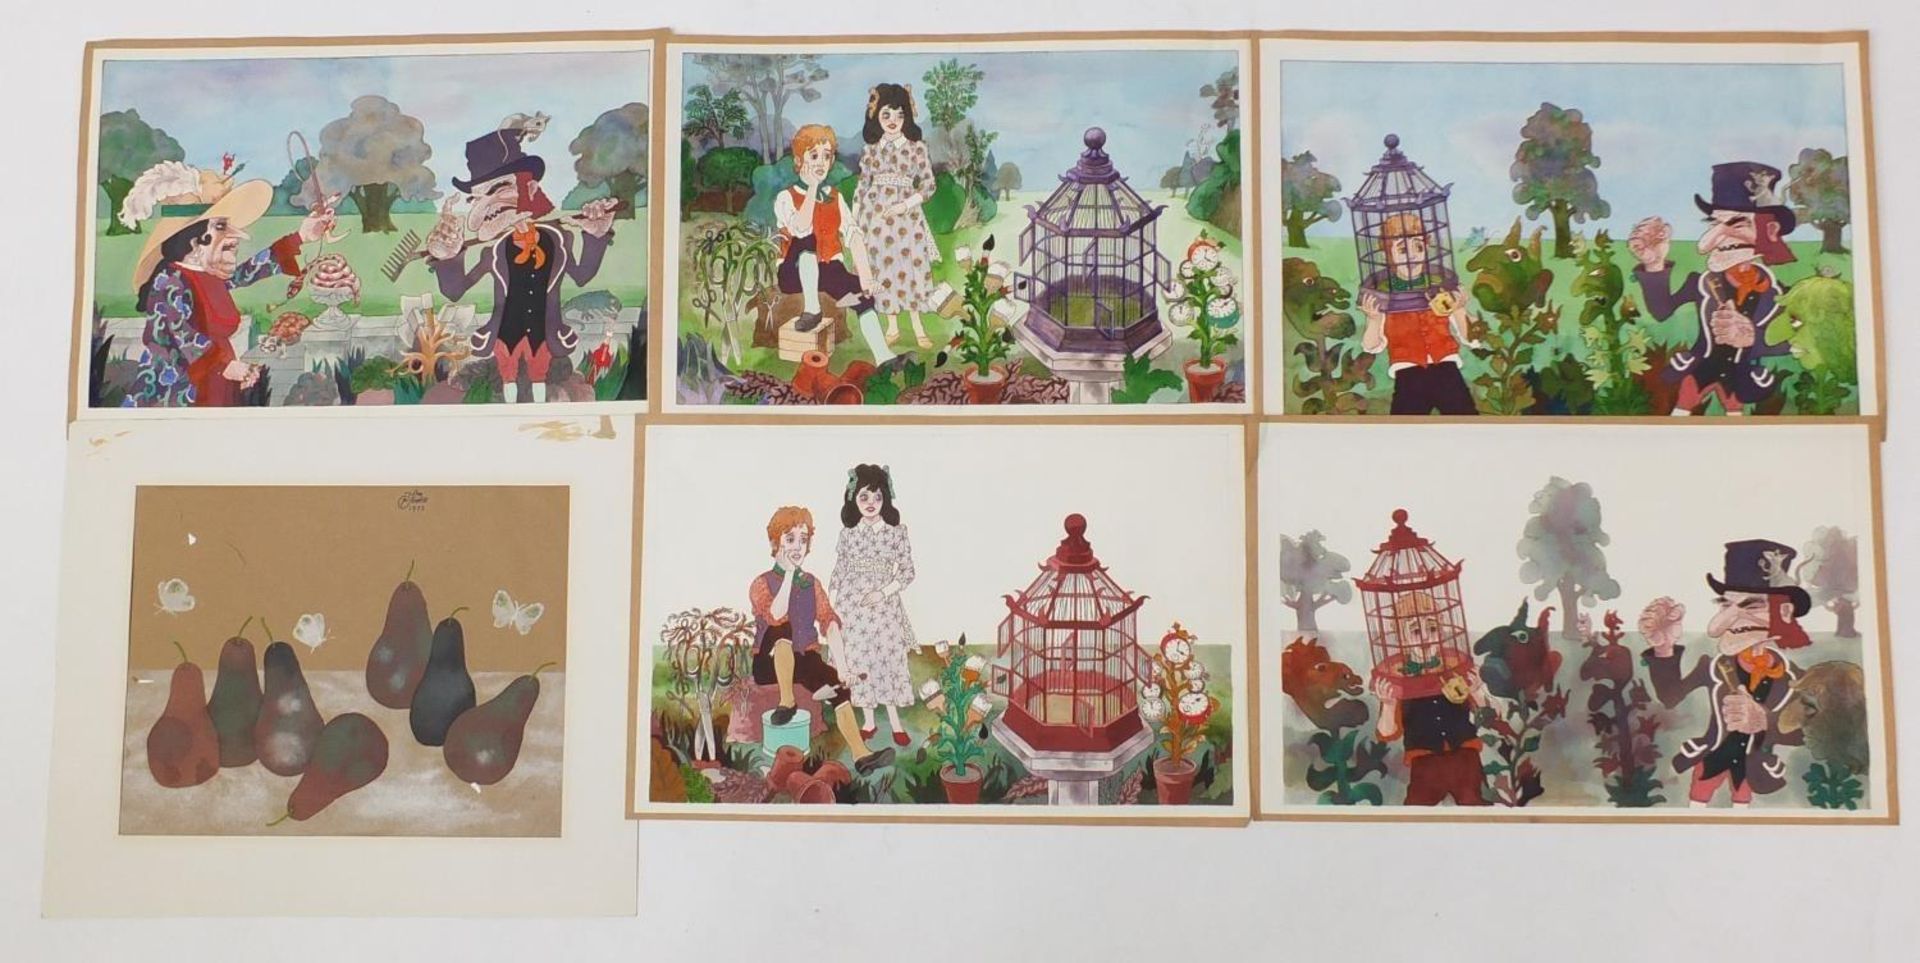 John Sewell - Jackanory, Collection of original watercolour illustrations, the largest approximately - Image 9 of 17